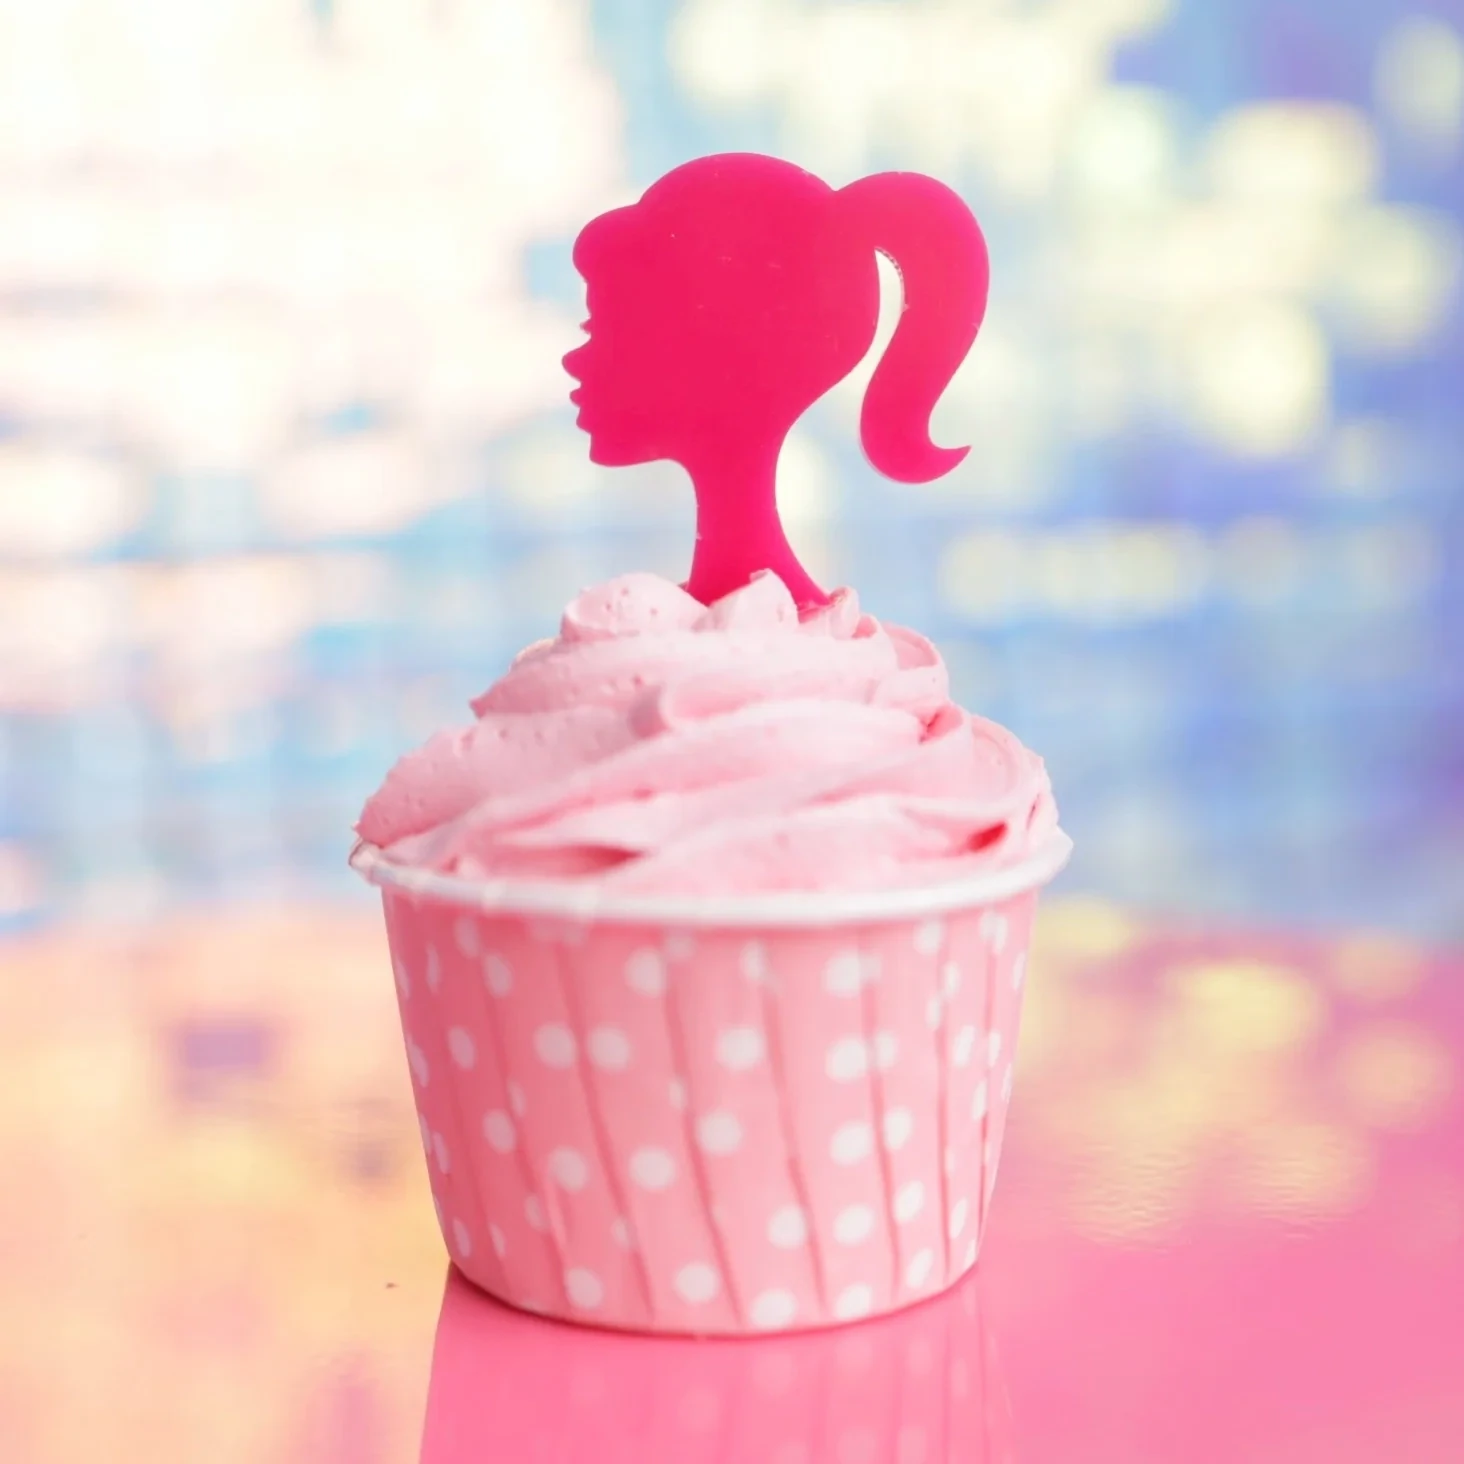 Sweet Stamp Cupcake Toppers -Barbie Head Silhouette -6 τεμ. Hot Pink - Πλαστικά Τόπερ Μπάρμπι σε φούξια